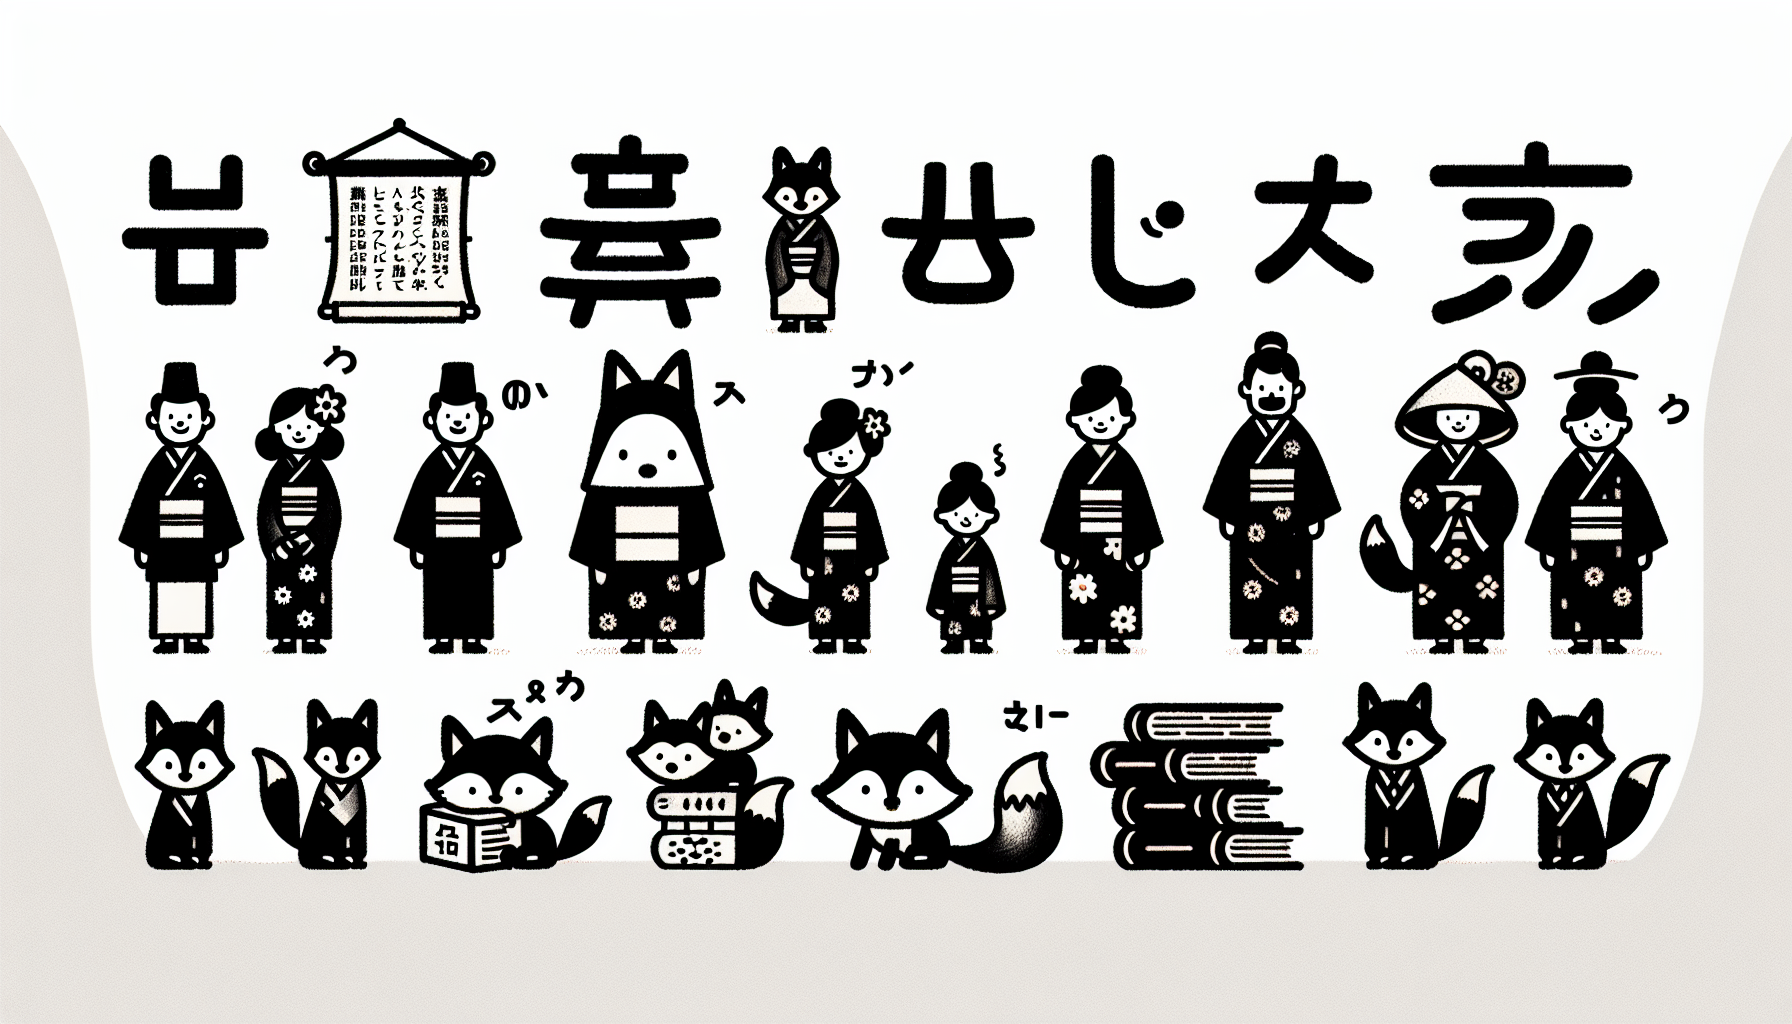 Various Japanese counter words for different categories of objects